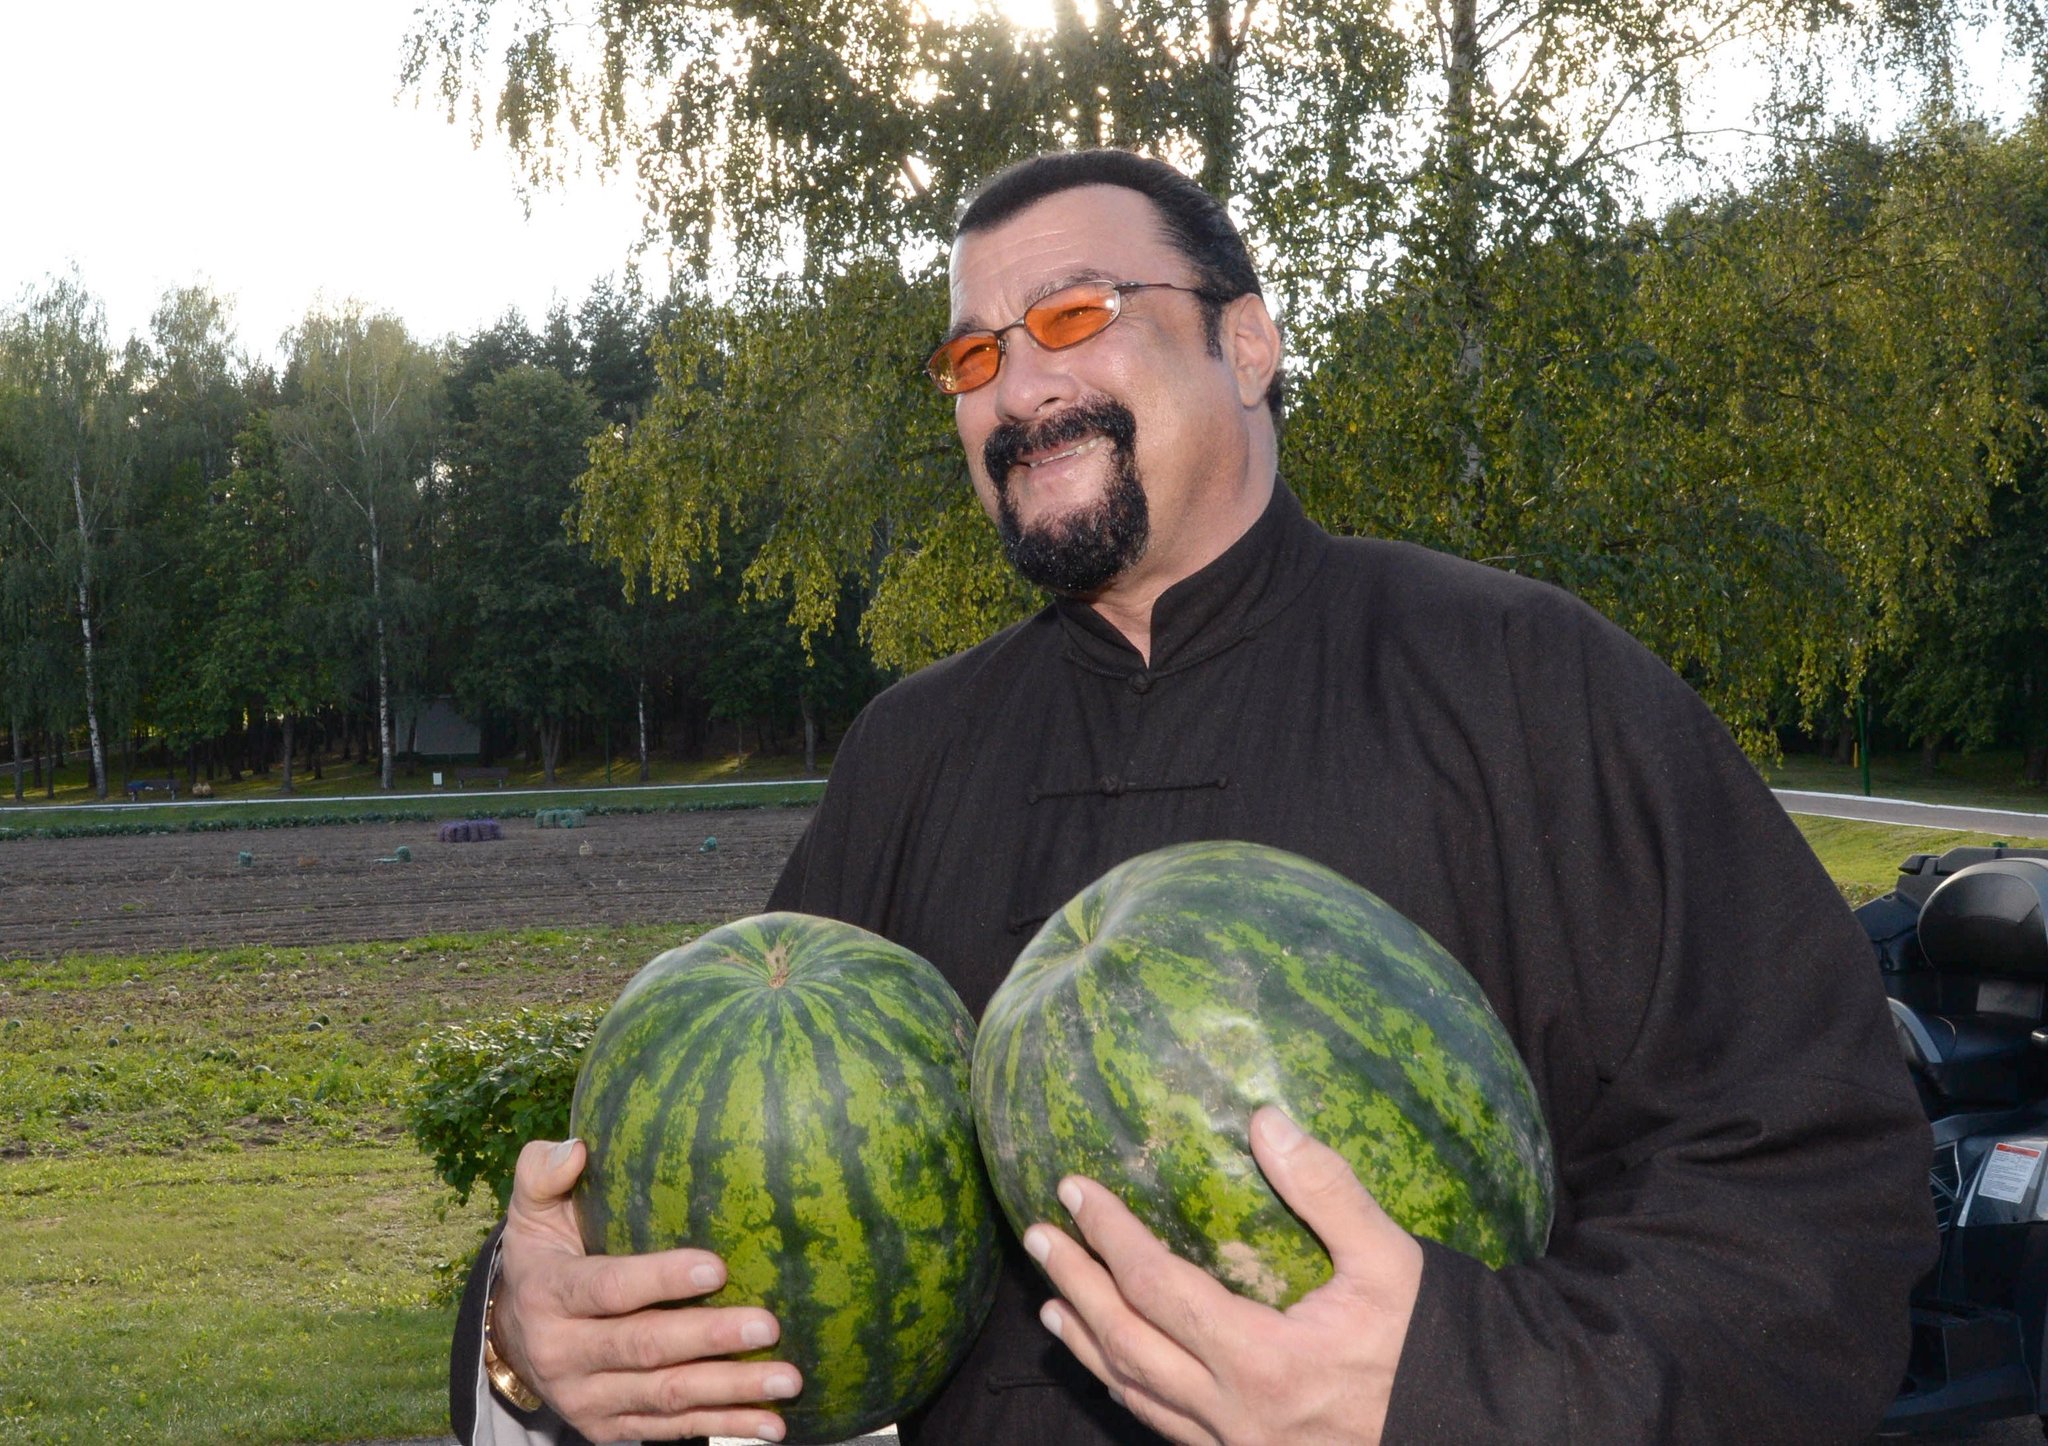 Steven Seagal turned 70 today. Happy birthday ! 